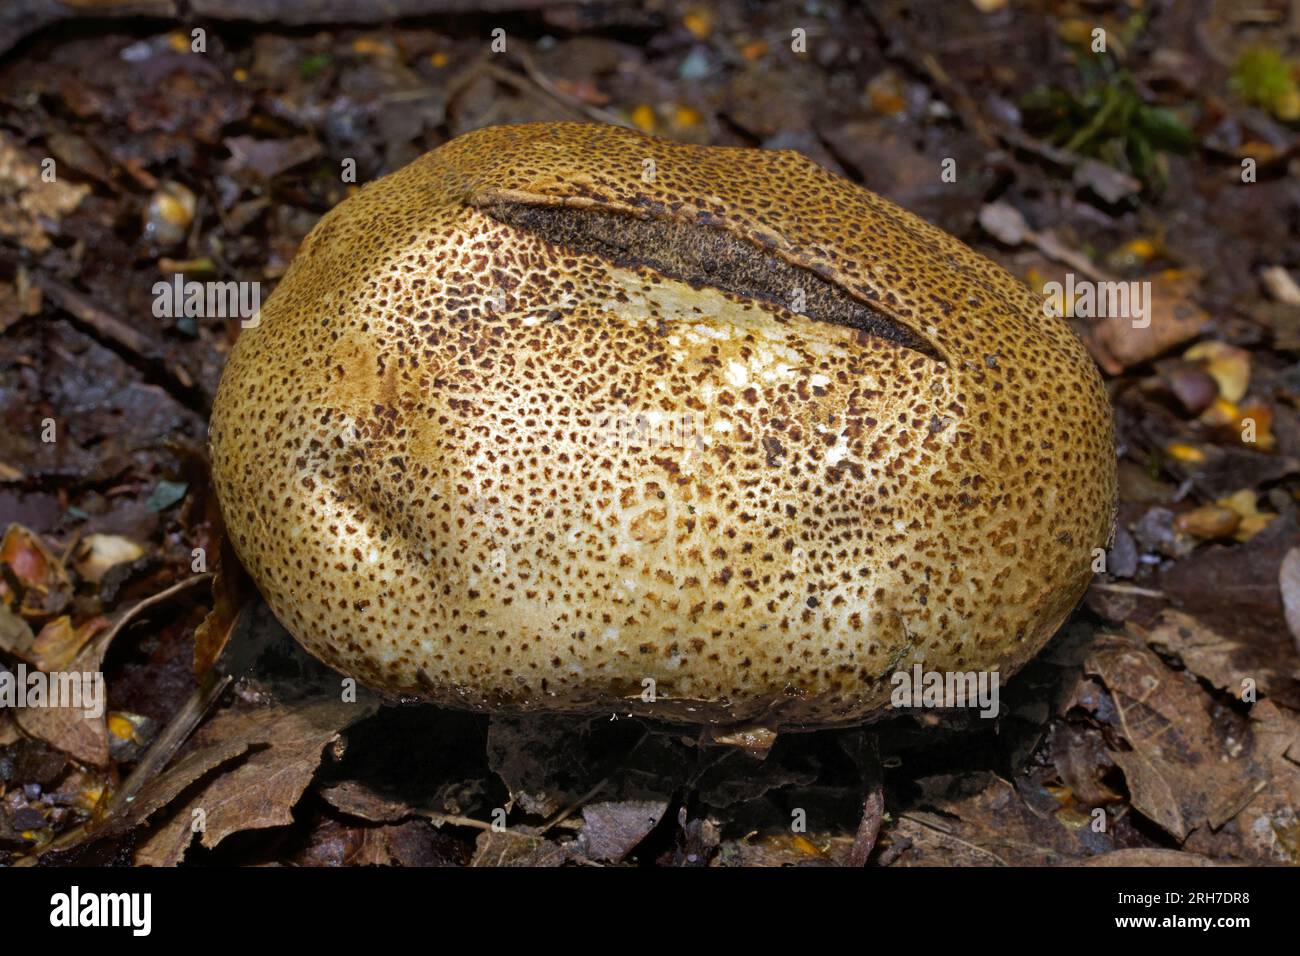 Scleroderma areolatum (Leopard Earthball) is a fungus from a group known as 'earth balls'. It is  commonly found in deciduous forests, Stock Photo